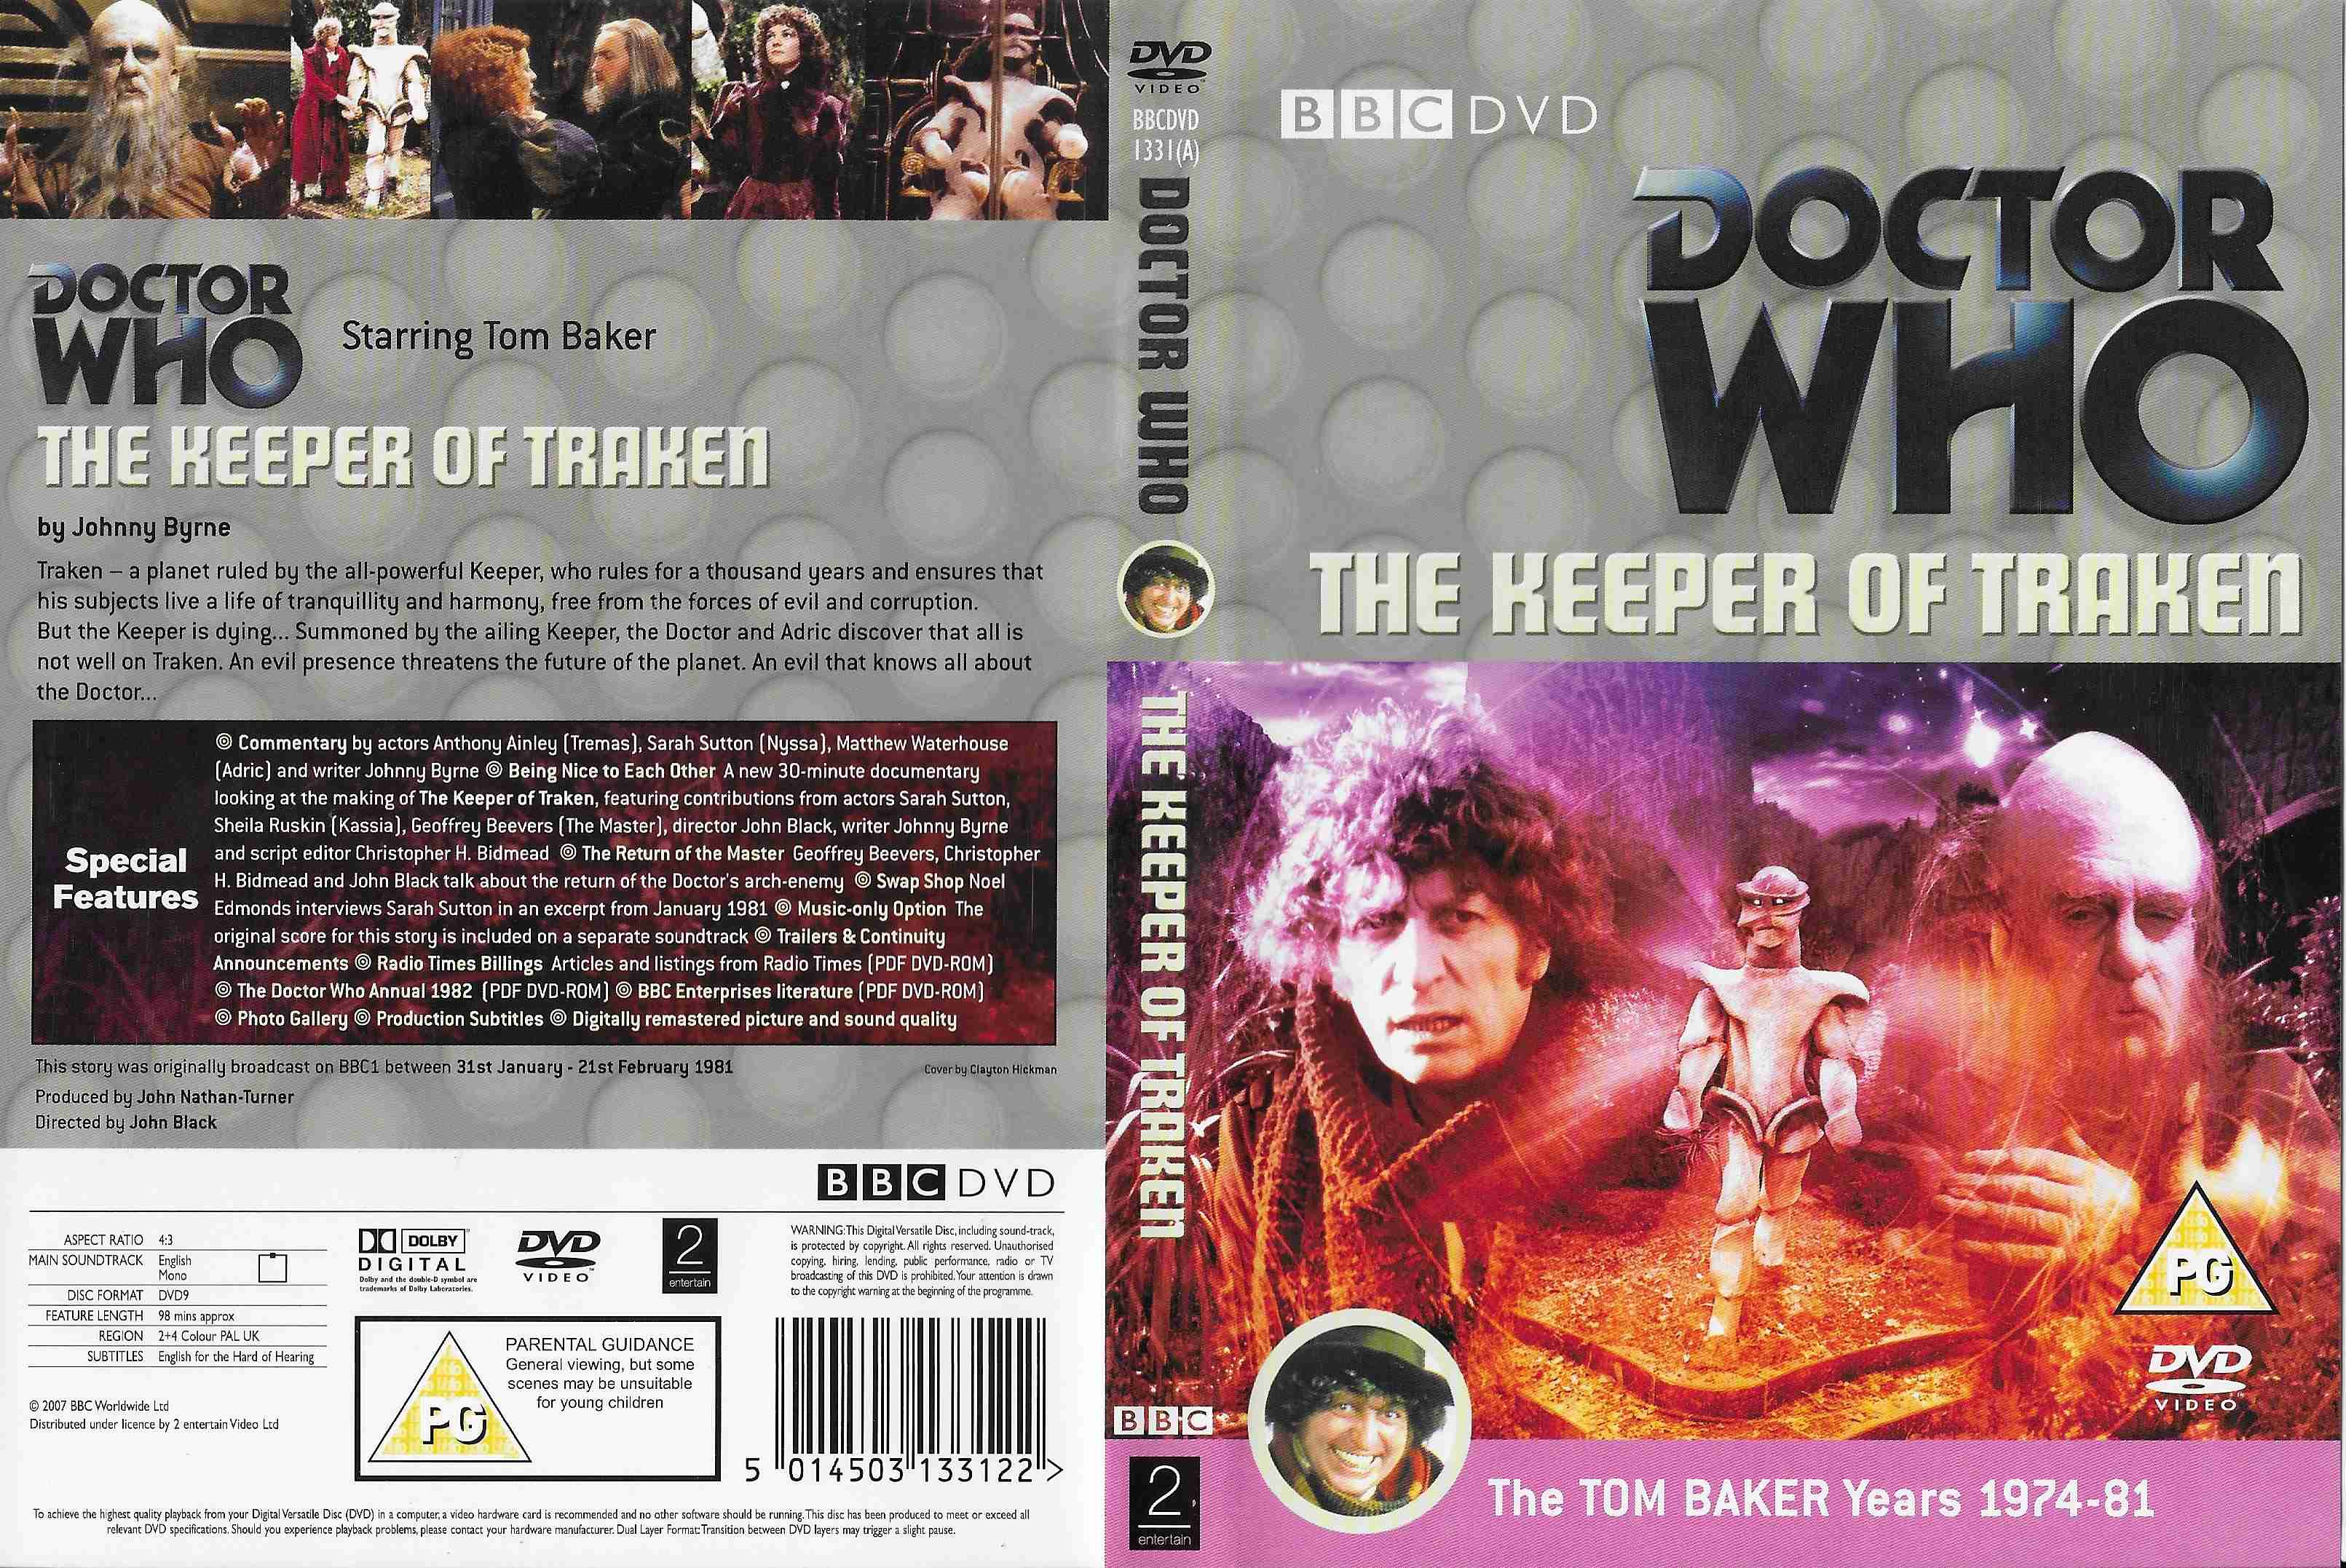 Picture of BBCDVD 1331A Doctor Who - The keeper of Tracken by artist Johnny Byrne from the BBC records and Tapes library